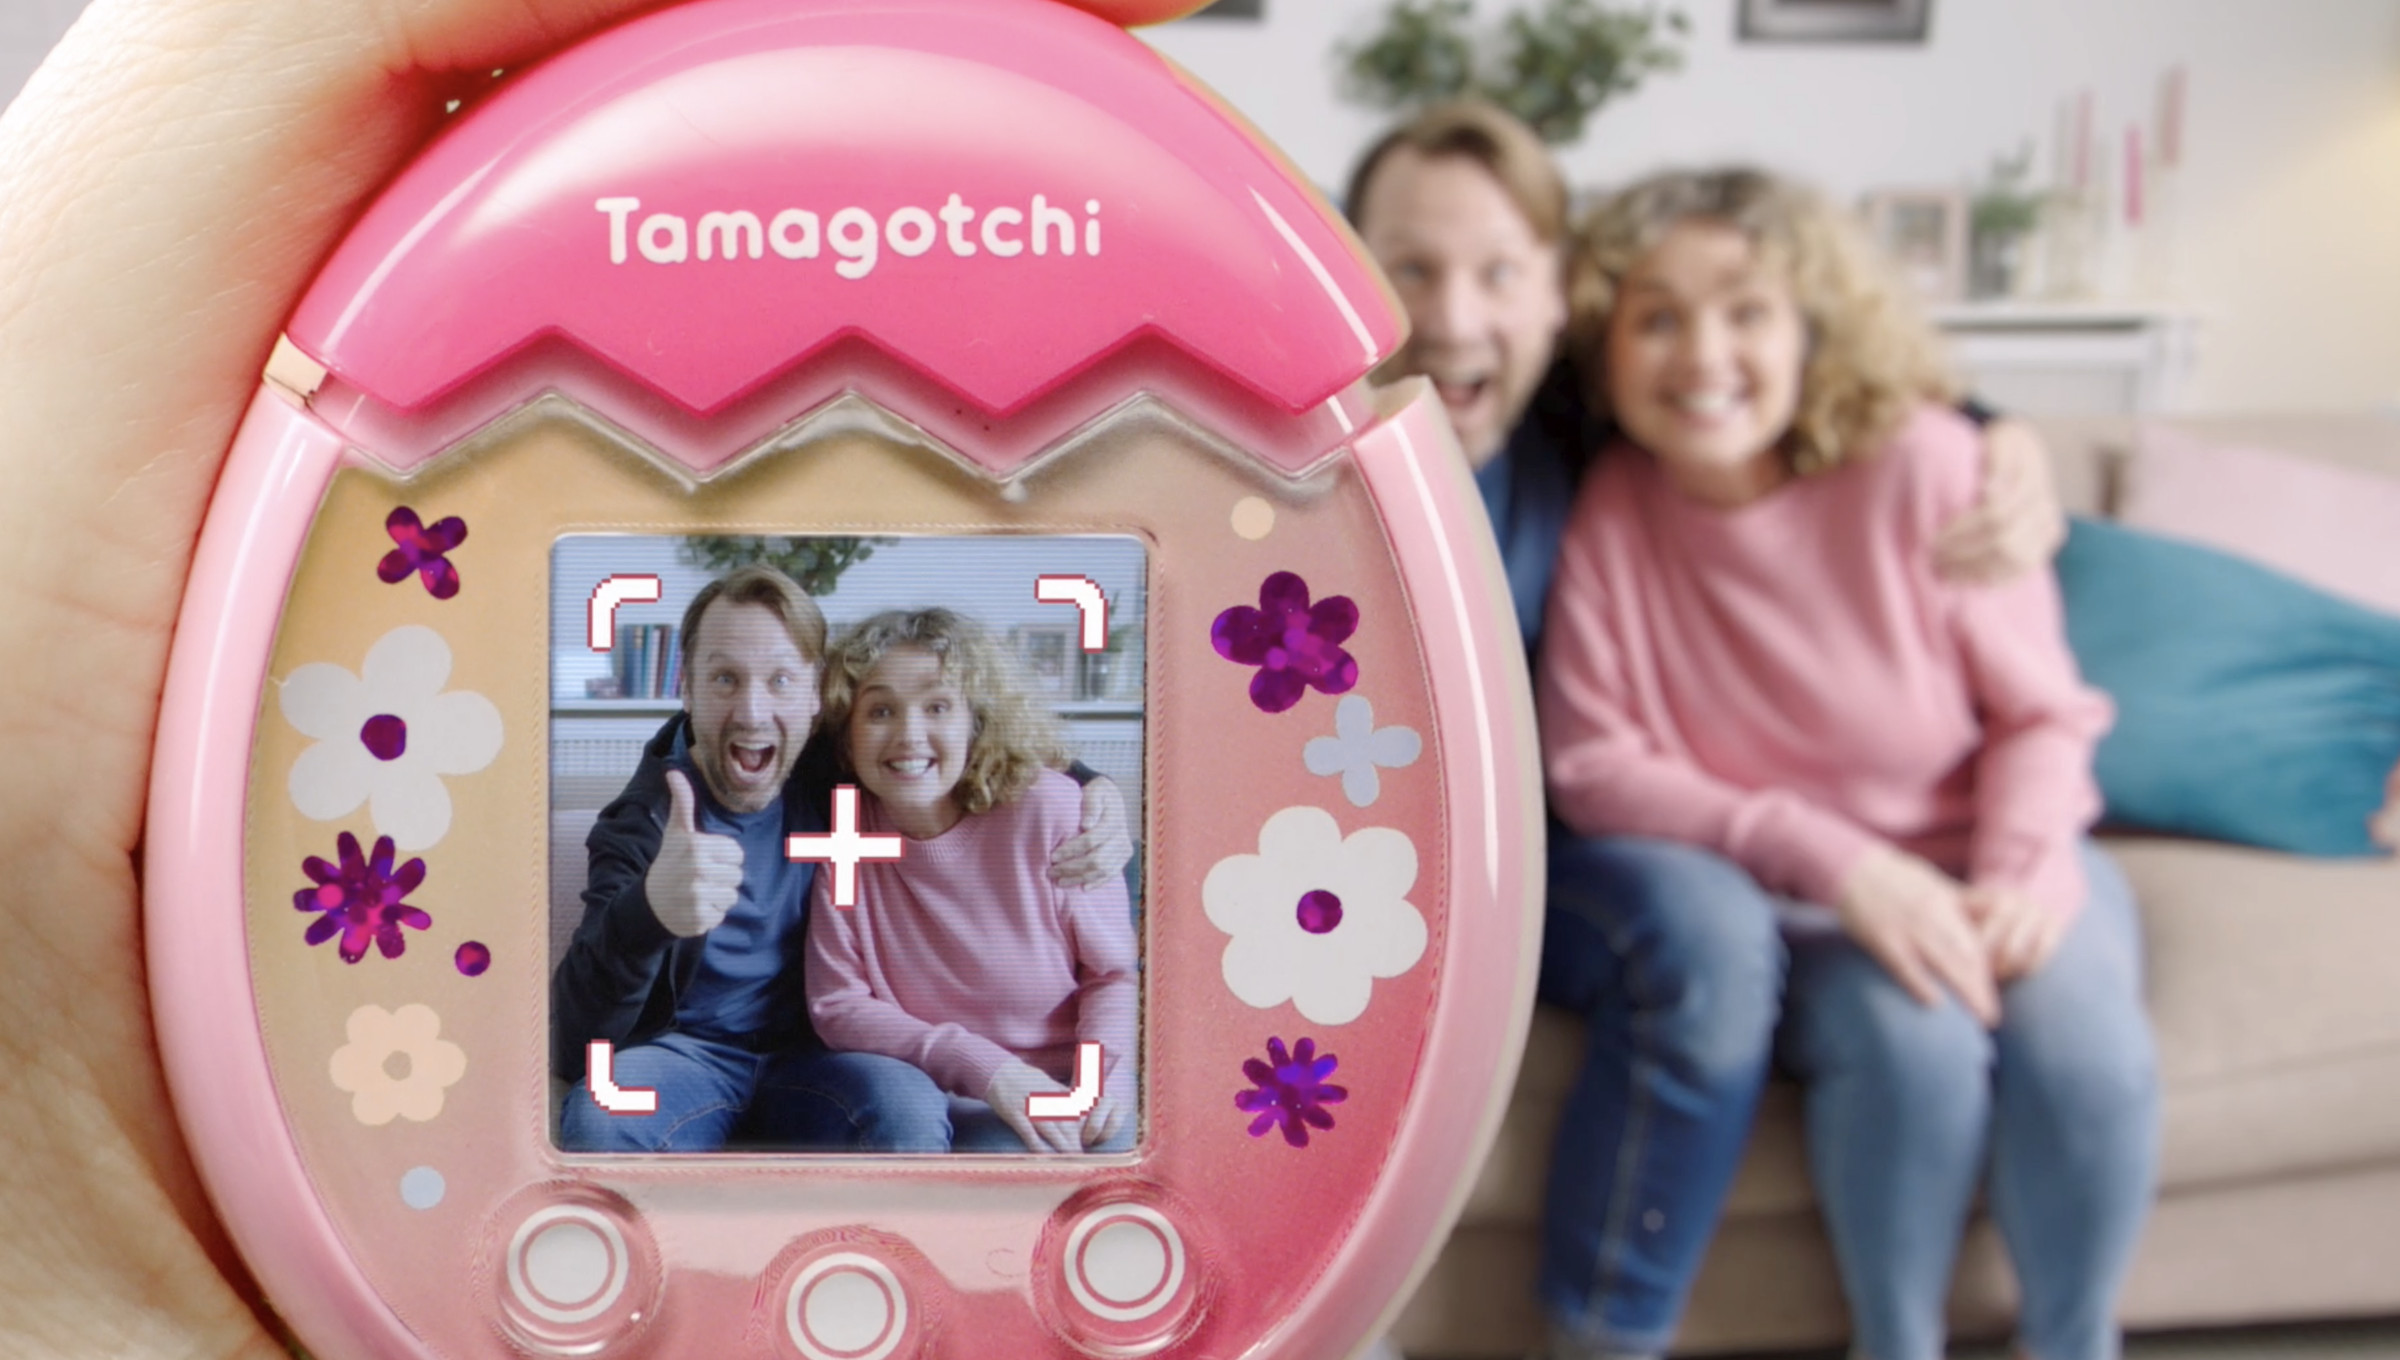 The Tamagotchi Pix’s top shell works as a shutter button when you’re taking photos.